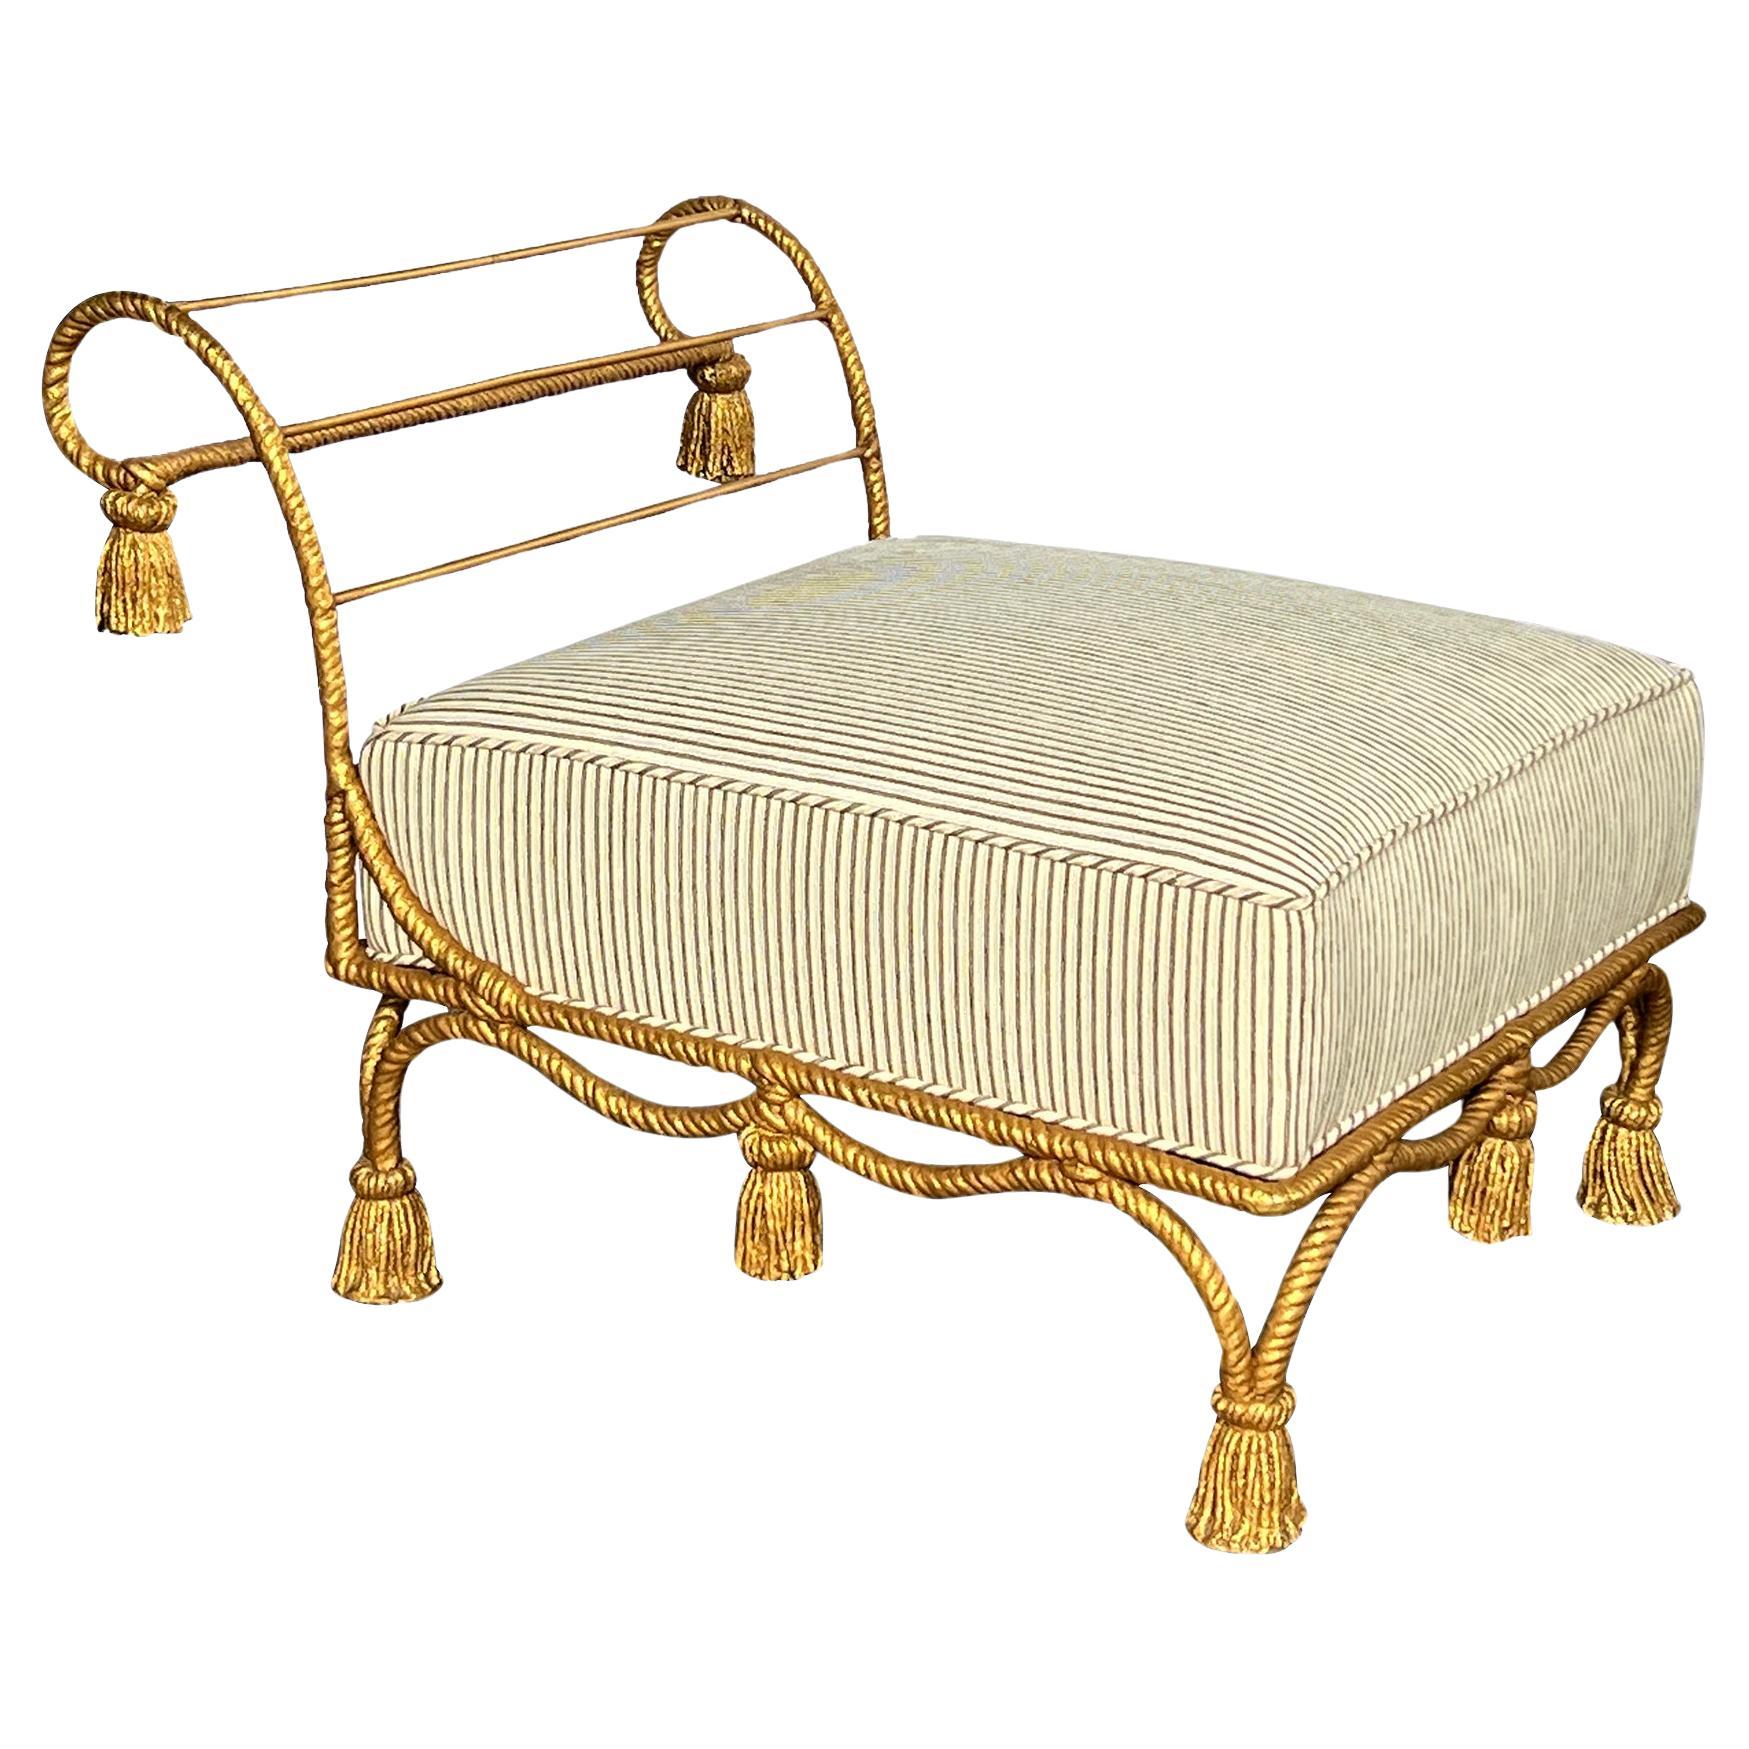 Italian Gilt-iron Rope Twist Bench with Giltwood Tassels For Sale